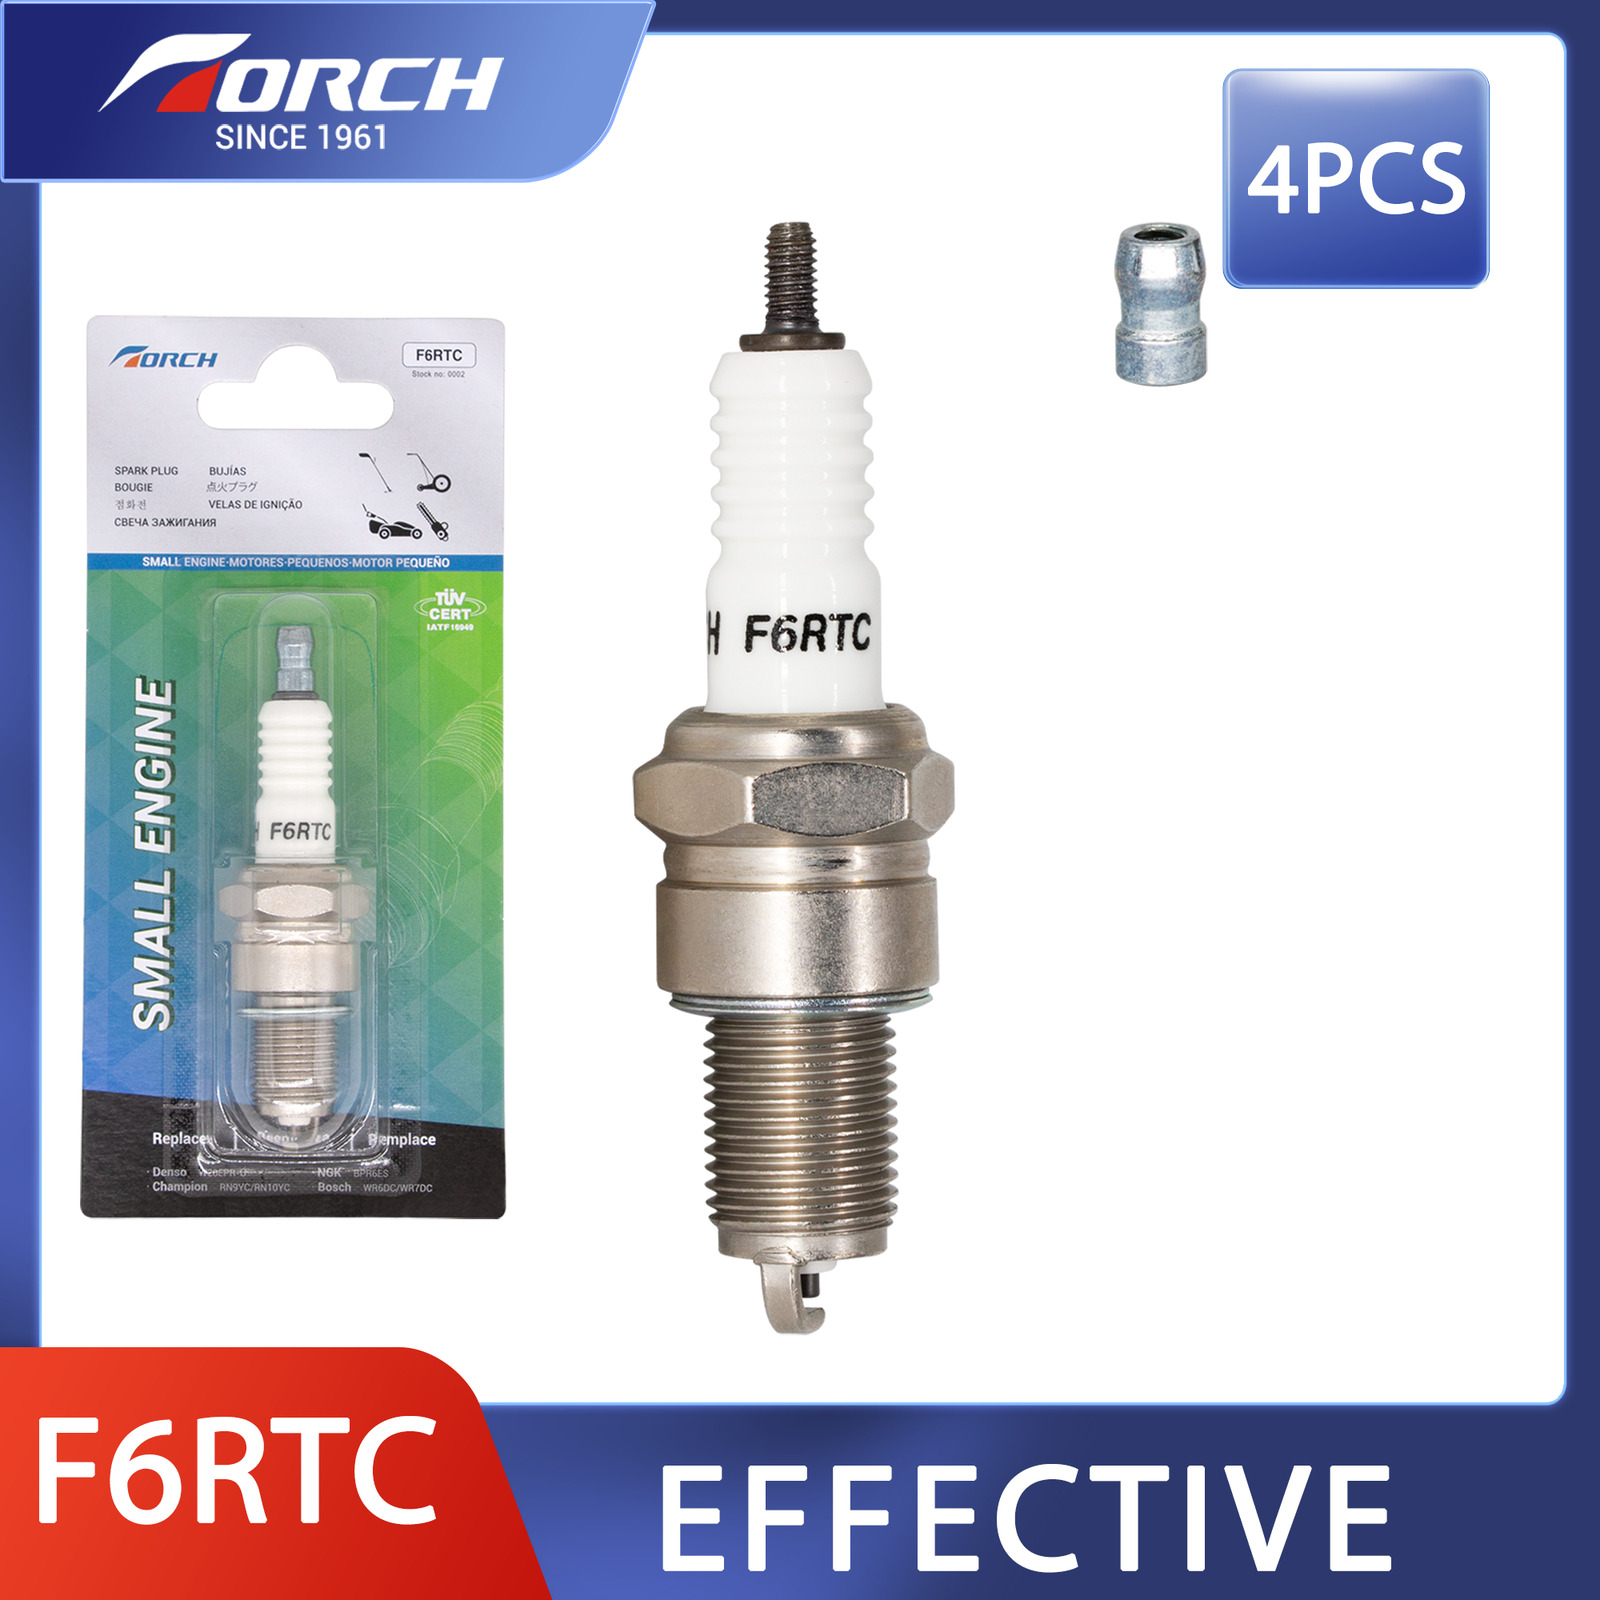 4x TORCH F6RTC Spark Plug Replacement for NGK BPR6ES Bosch 7900/WR7DC WR7DC2